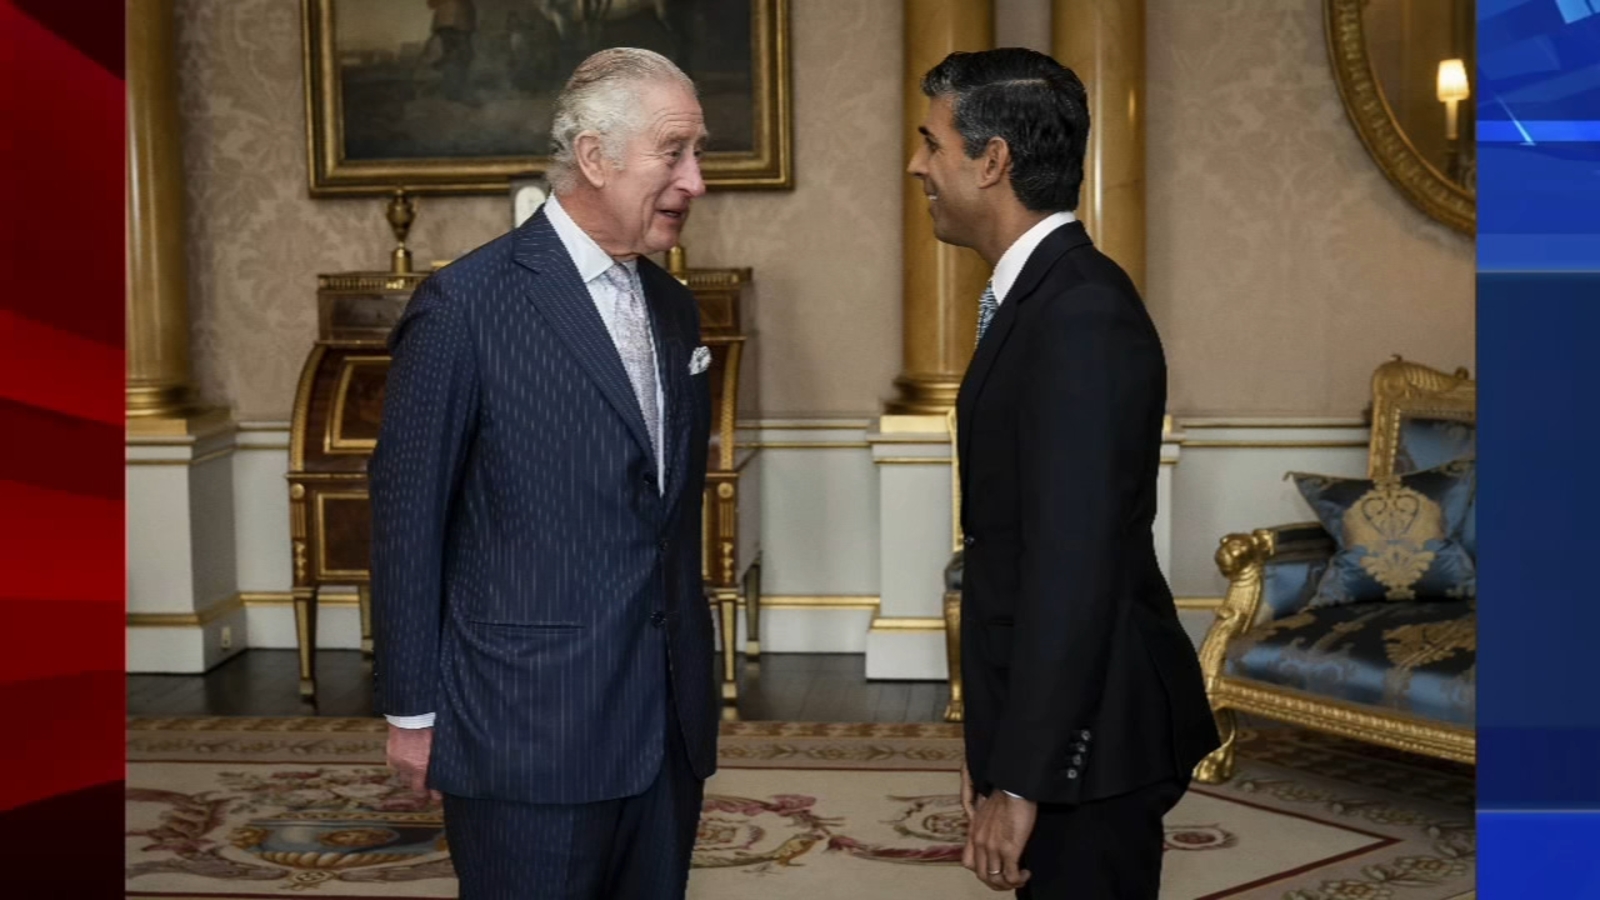 Rishi Sunak is UK’s first leader of color after being asked to form a government by King Charles III